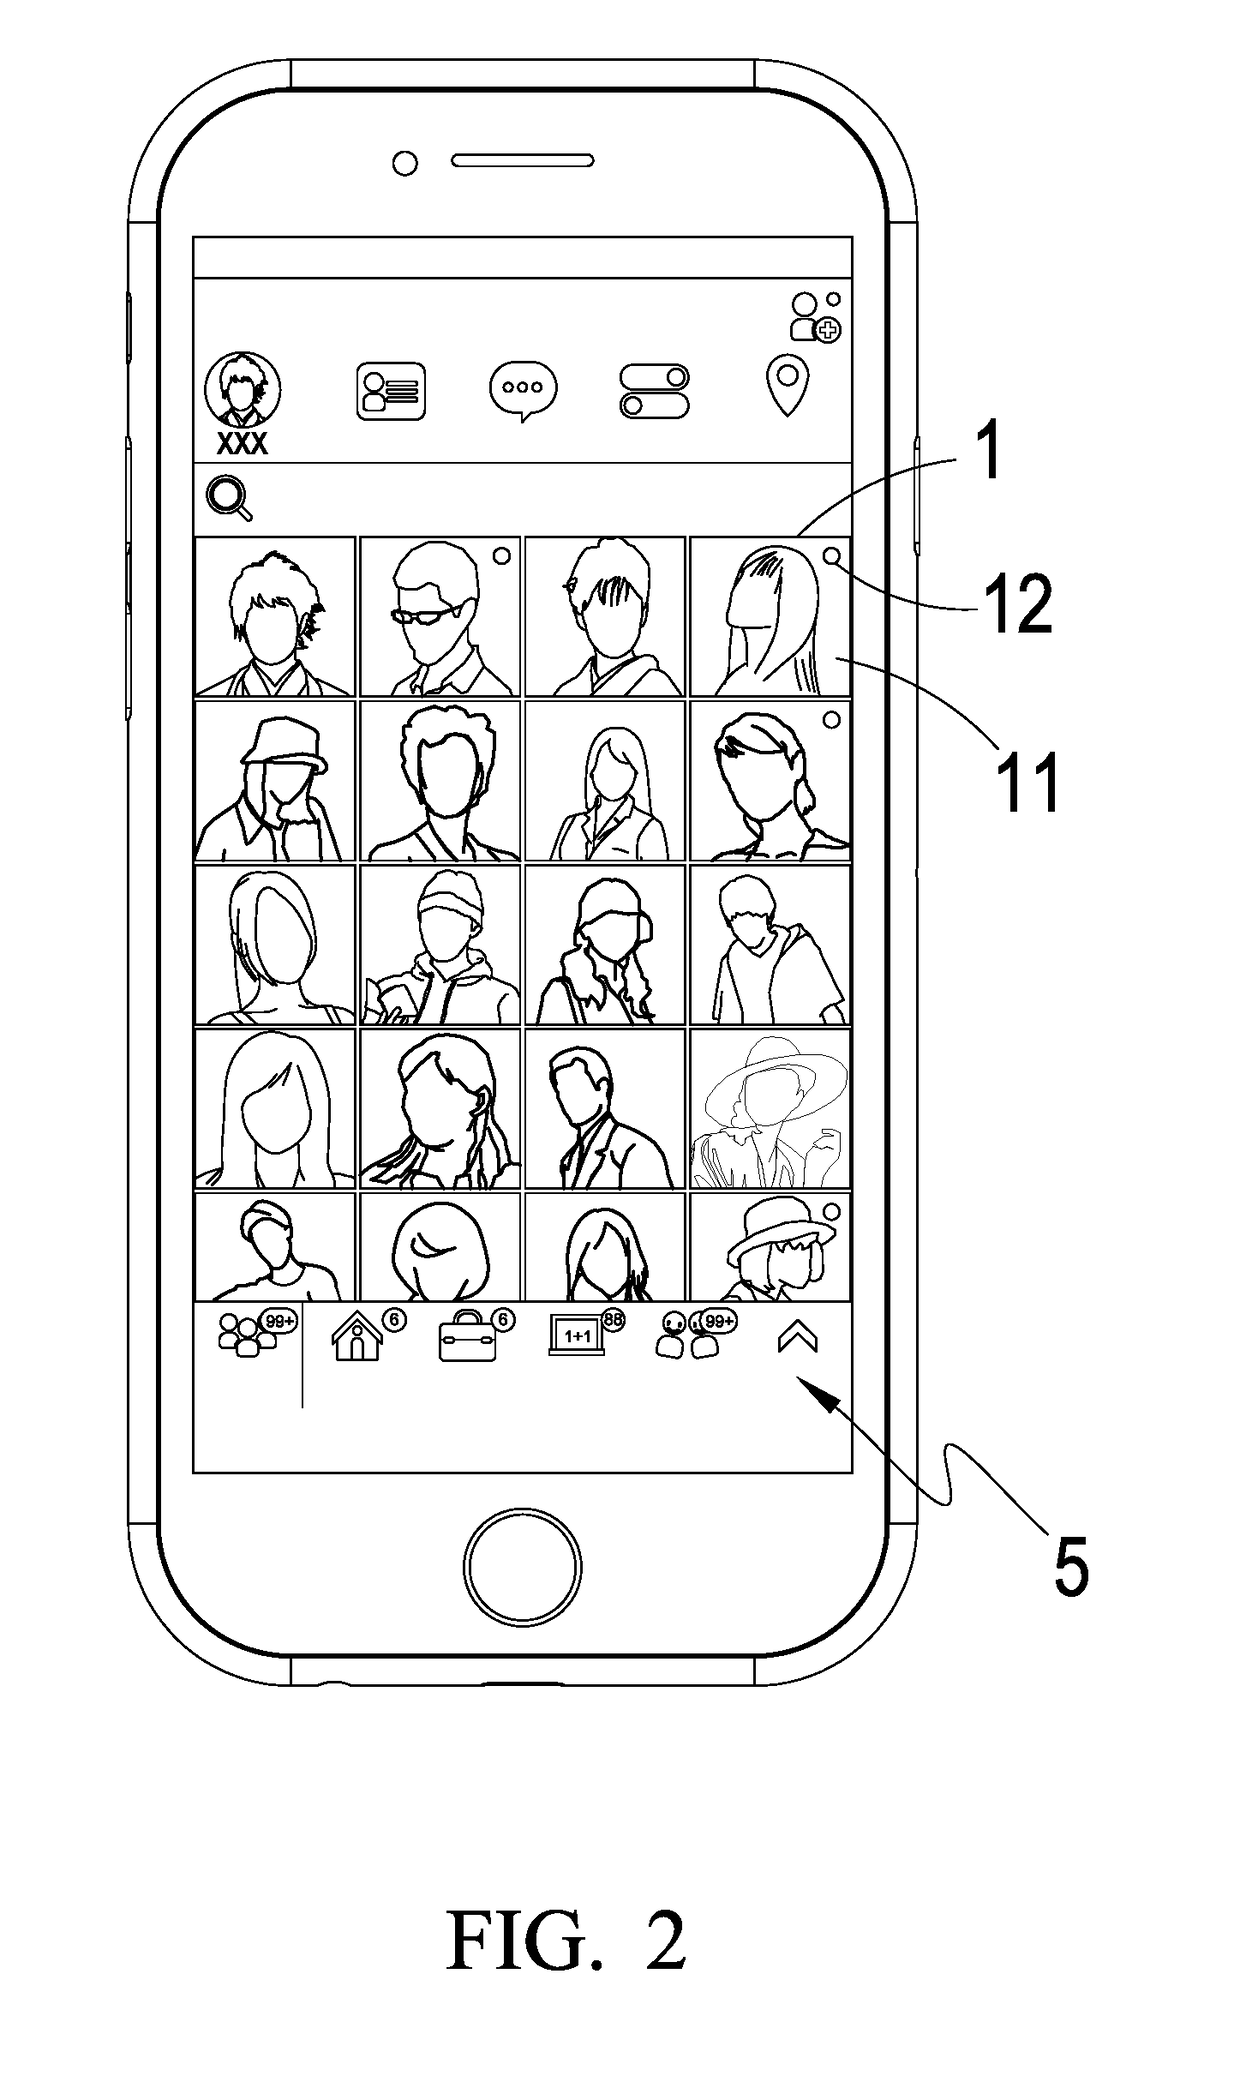 Messaging system with configurable identification